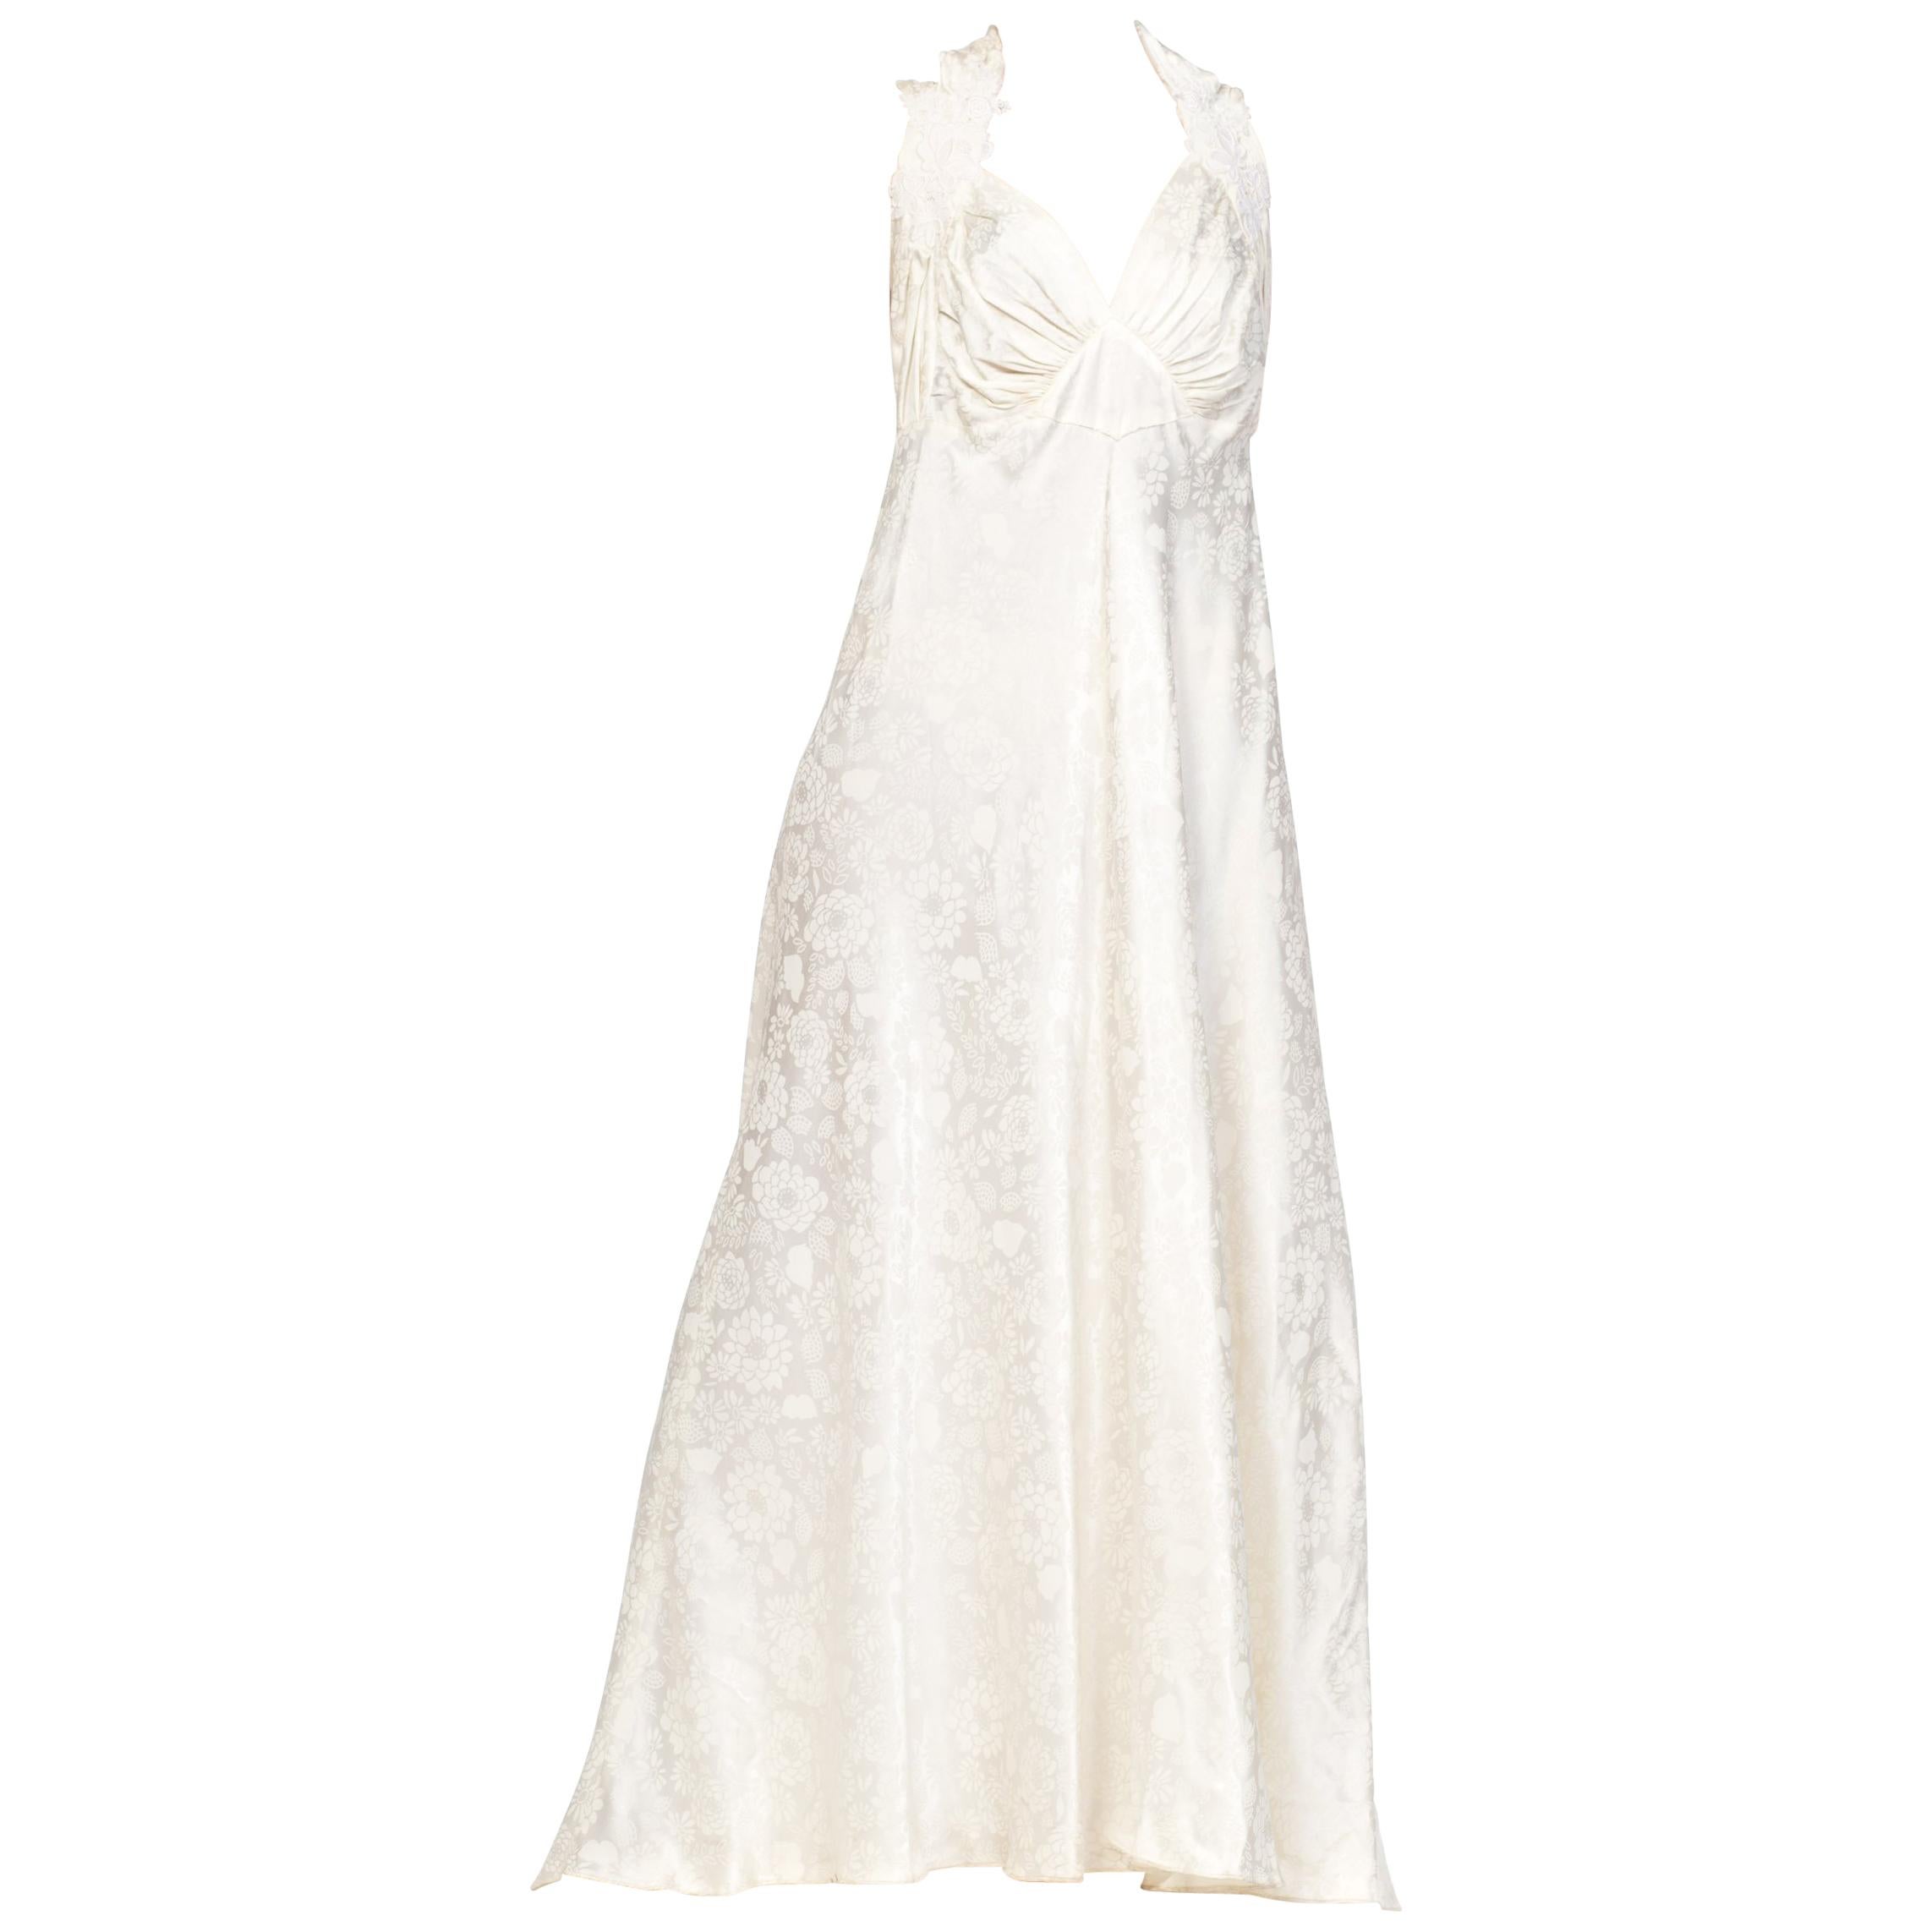 MORPHEW COLLECTION Ivory Floral Rayon Satin Bias Cut  Gown With Lace Trim & Tra